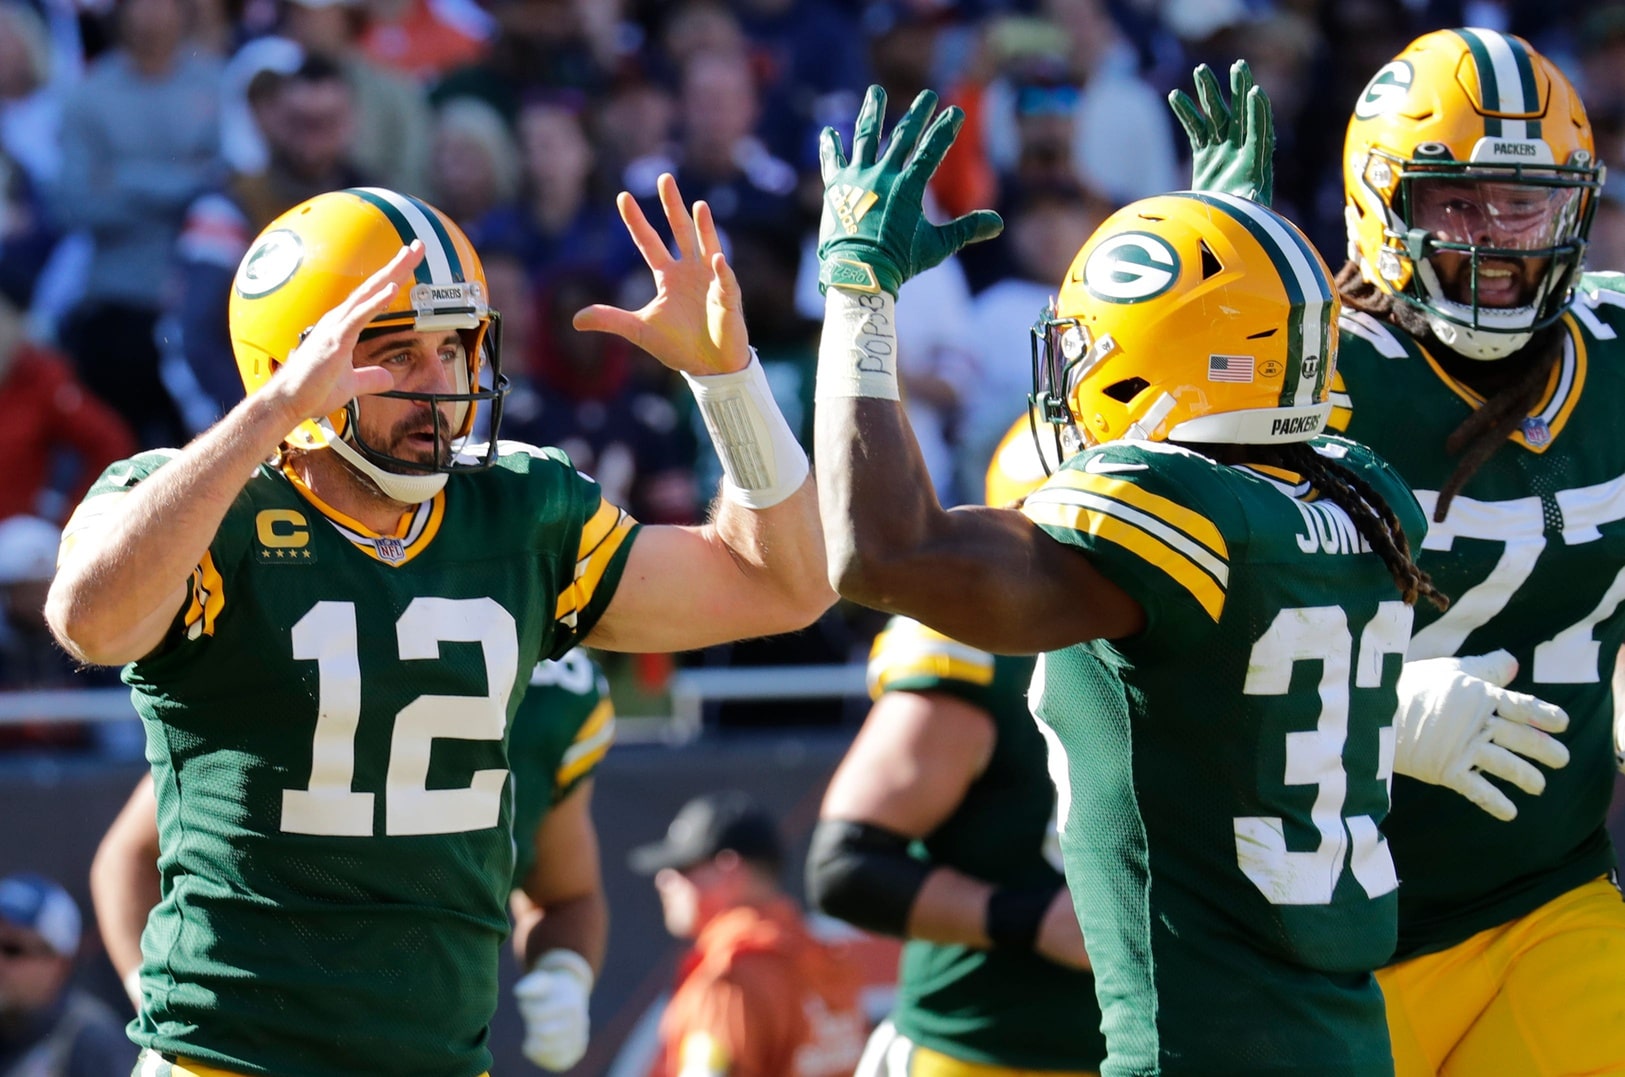 Green Bay Packers quarterback Aaron Rodgers (12) celebrates scoring a touchdown in the fourth quarter with running back Aaron Jones (33) during their football game Sunday, October 17, 2021, at Soldier Field